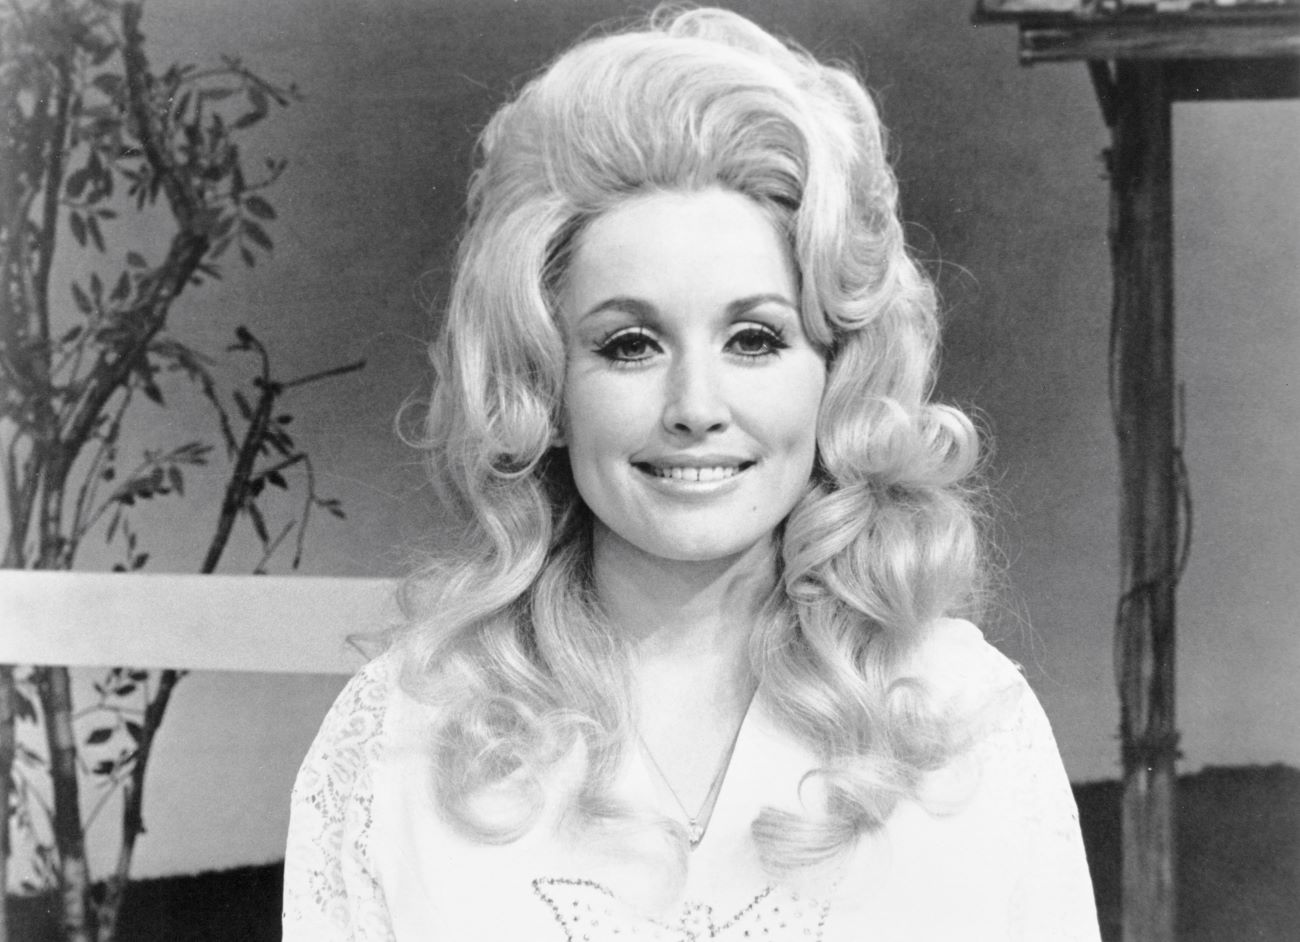 A black and white photo of Dolly Parton wearing a rhinestoned white shirt.